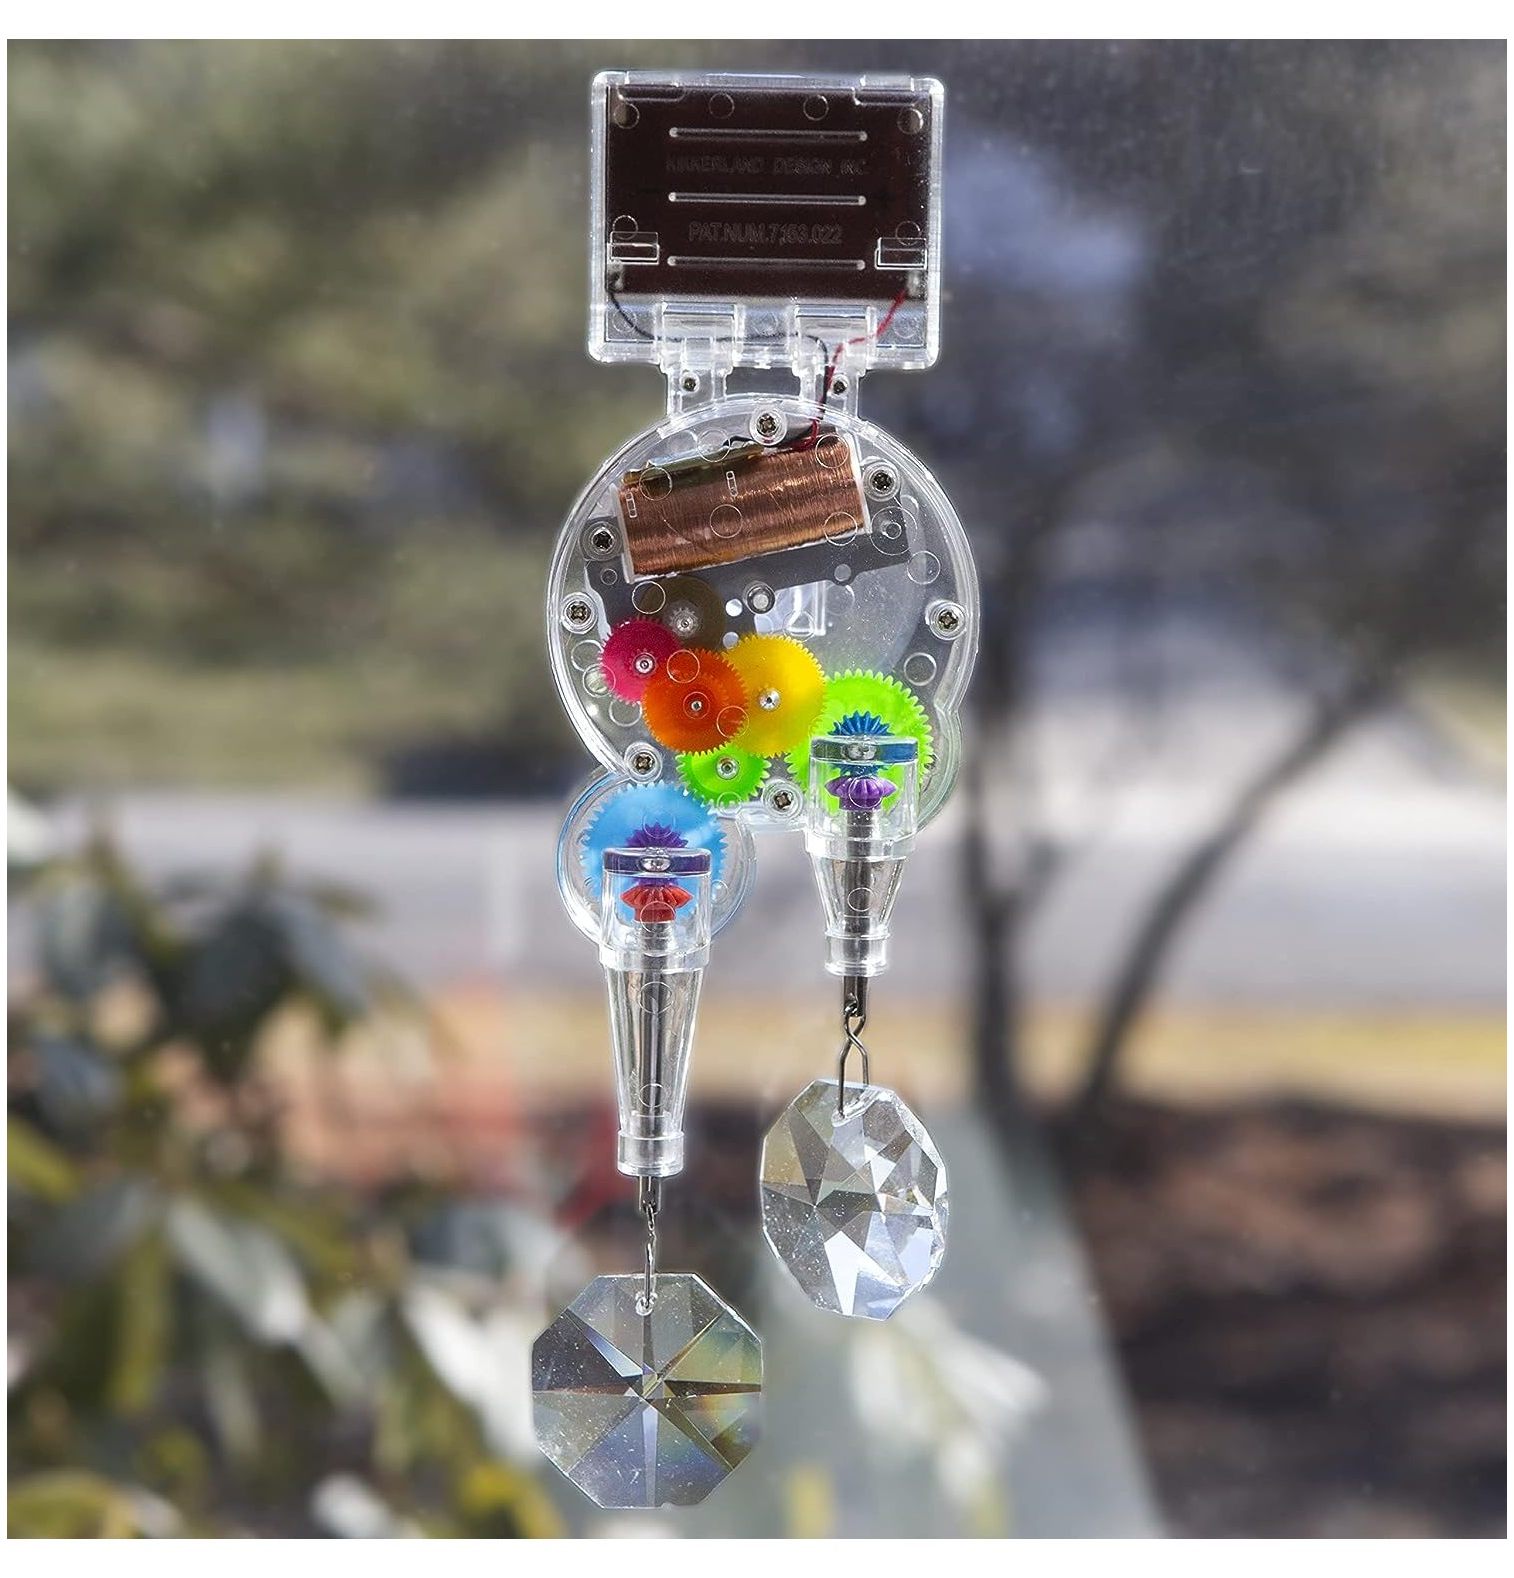 Cintbllter Solar Powered Double Rainbow Maker, Sun Catcher, Cat Toy, Rainbow , Window Home Decor Decoration, Fun Educational Science, Gift for Family